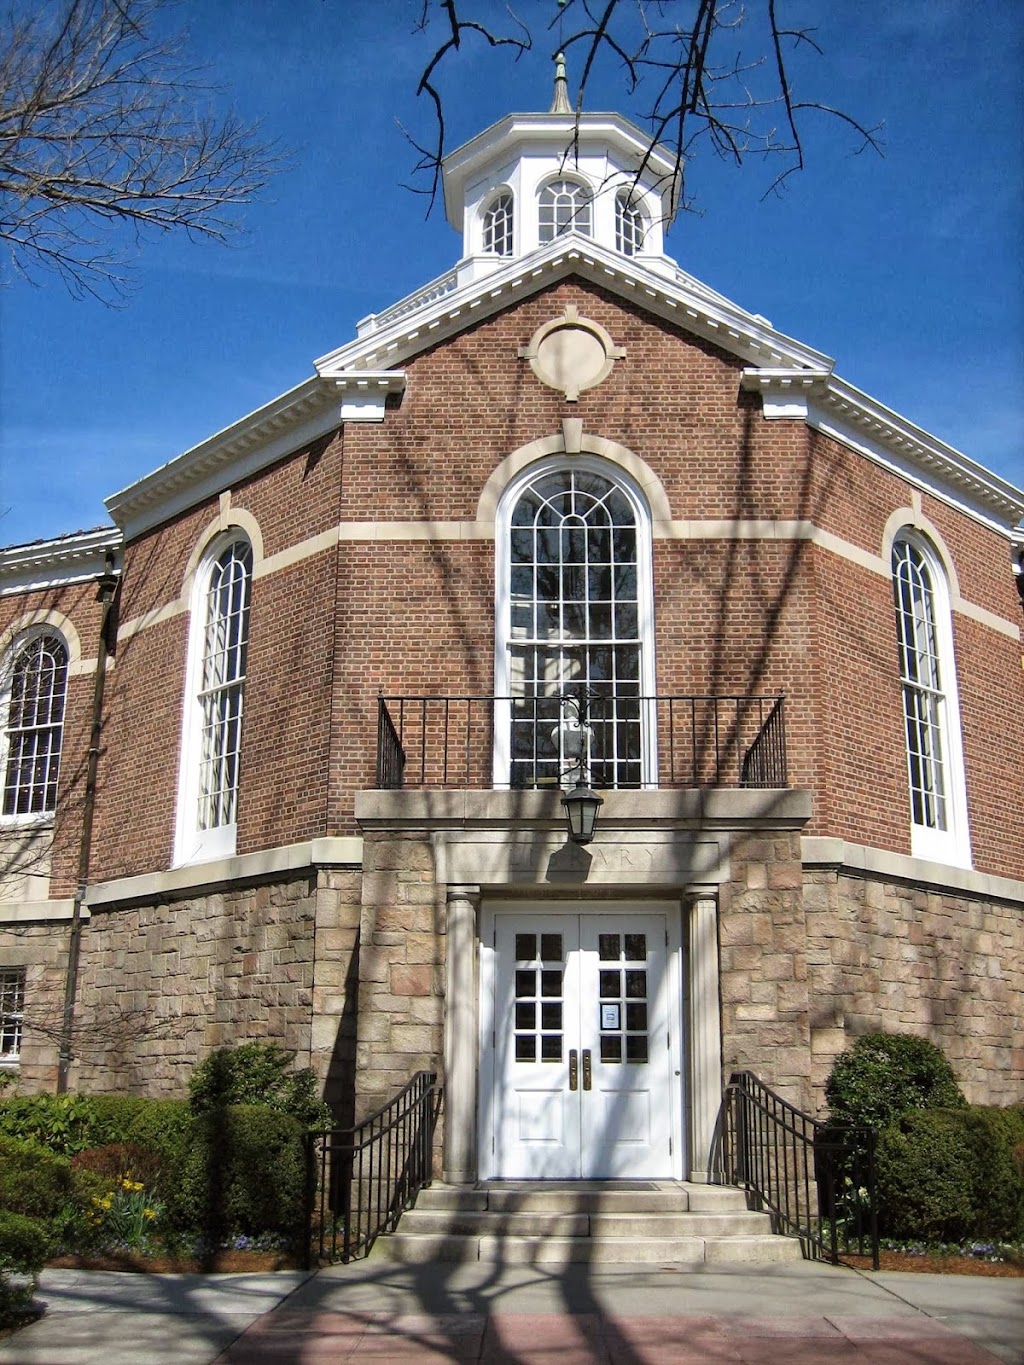 Perrot Memorial Library | 90 Sound Beach Ave, Old Greenwich, CT 06870 | Phone: (203) 637-1066